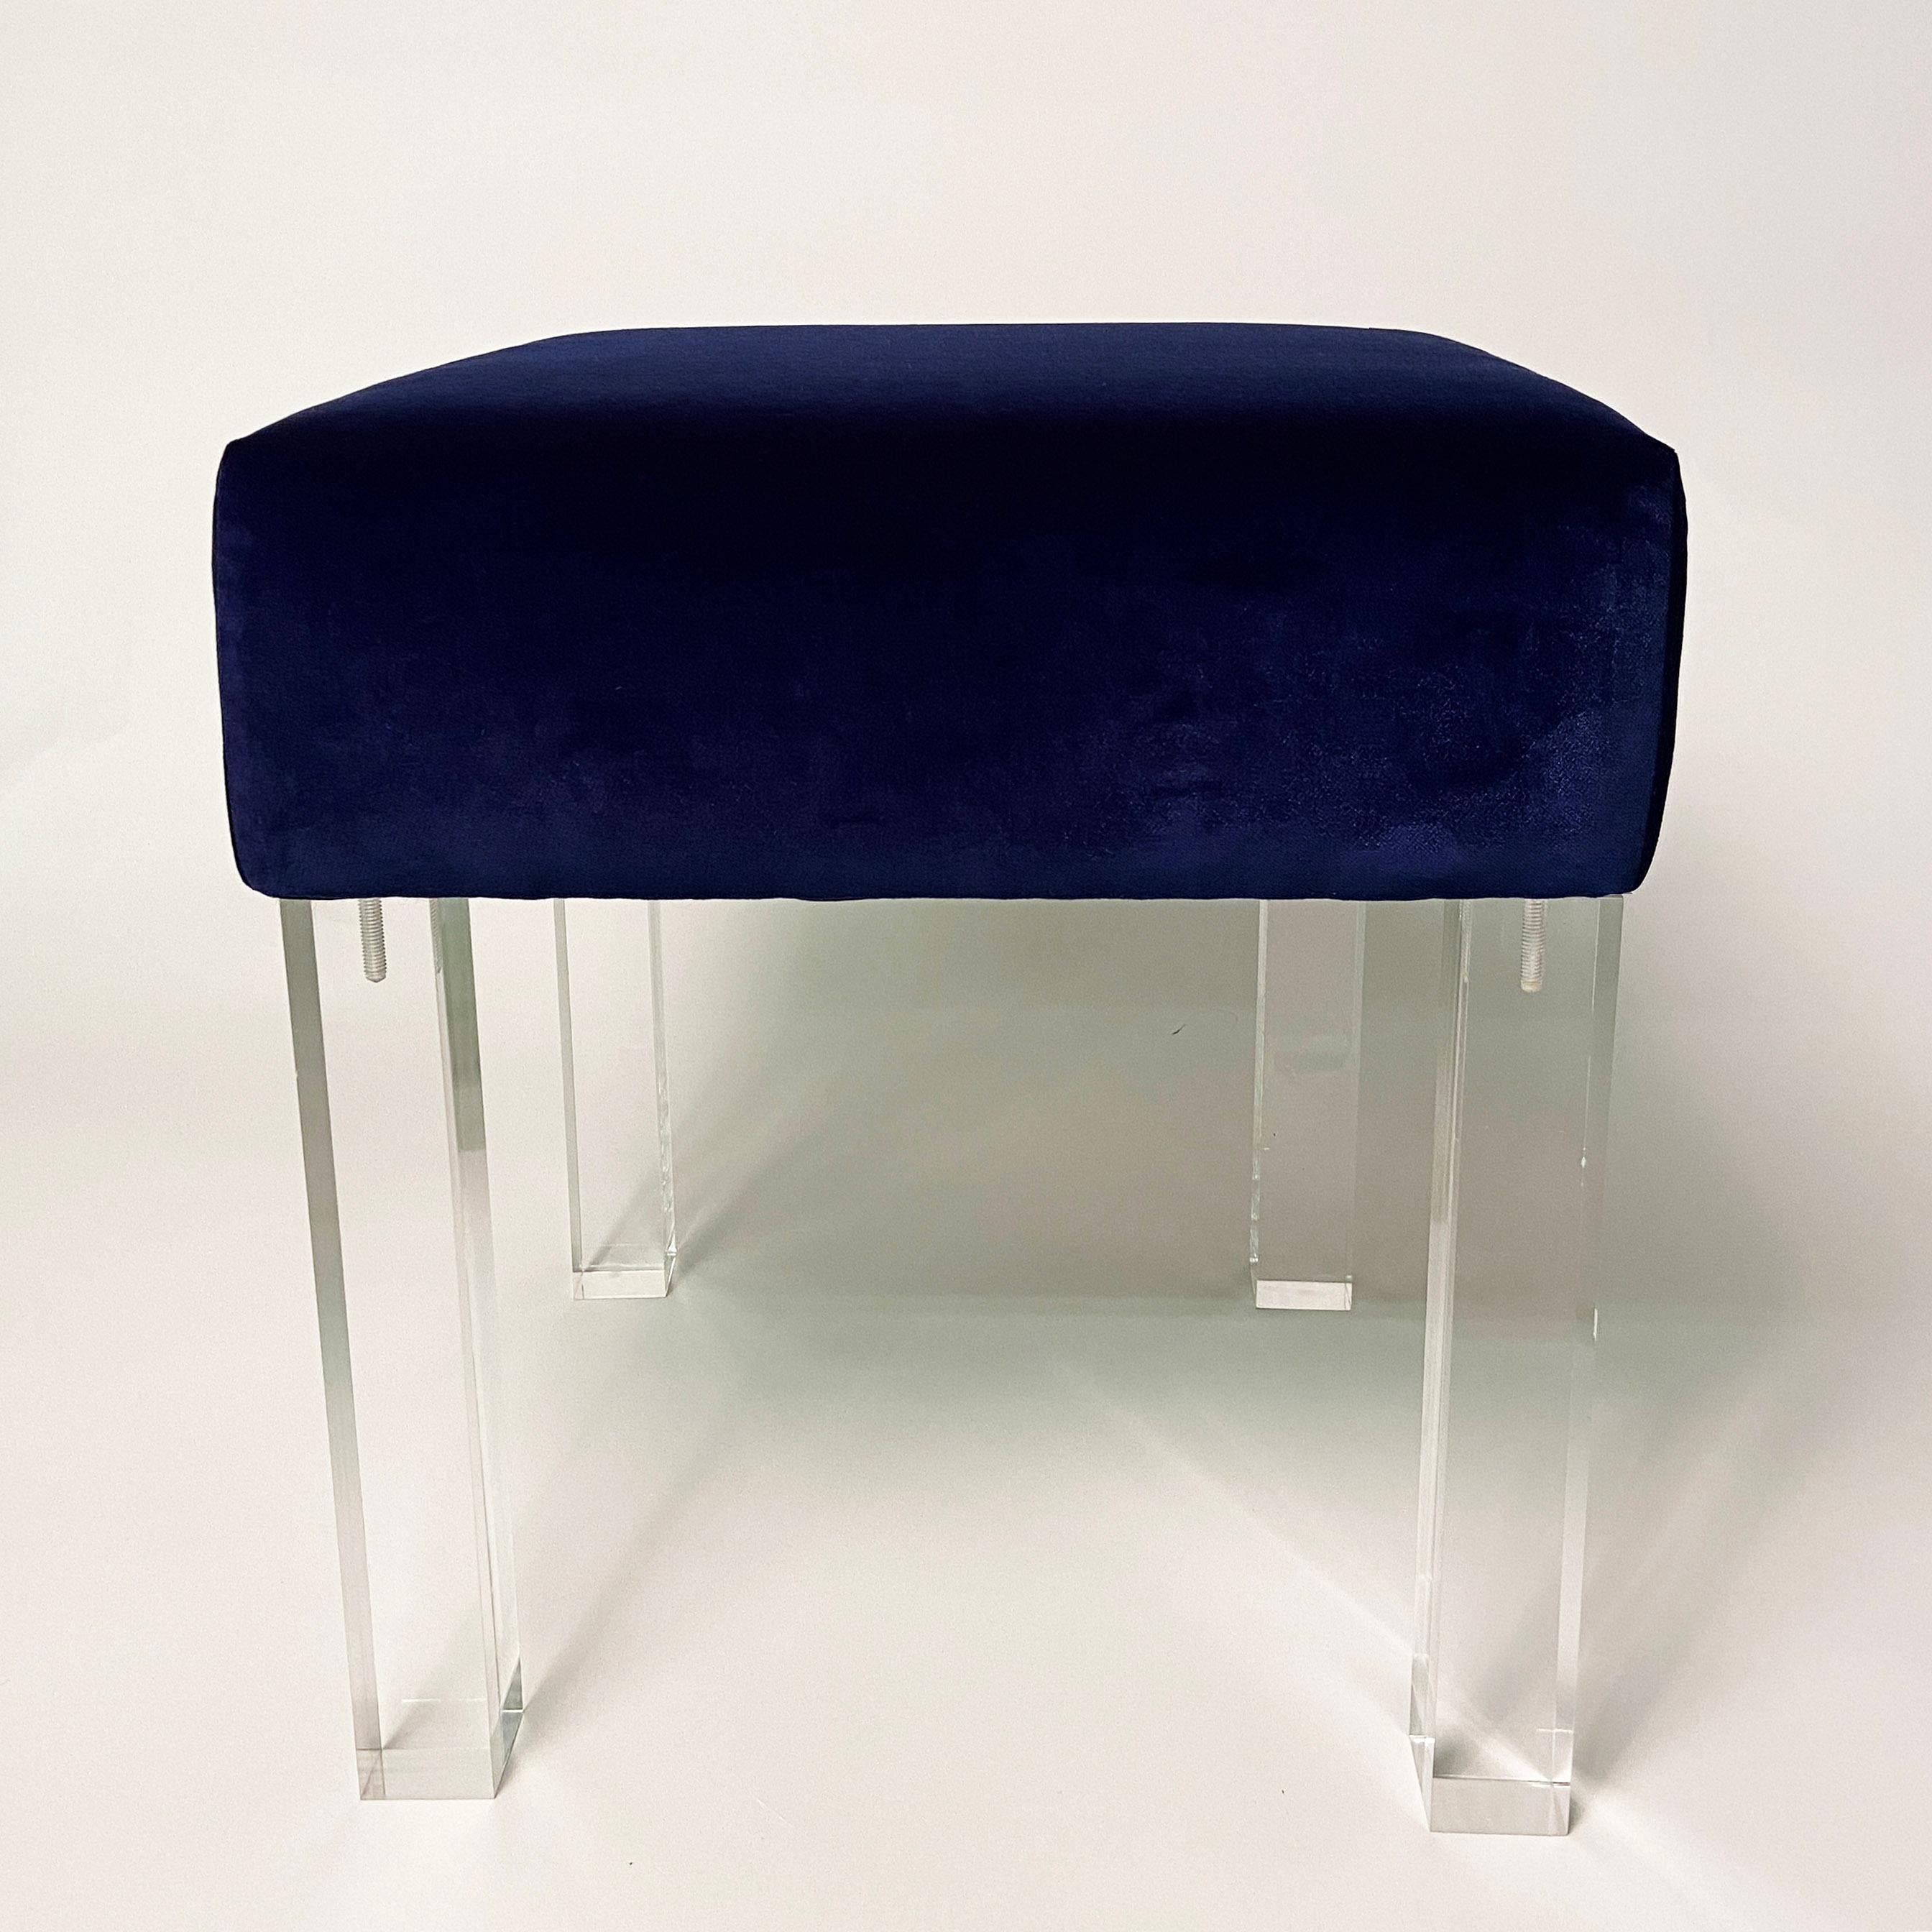 A pair of stunning square low stools with cushions upholstered in fine navy velvet and installed with solid lucite legs. These stools are new and in excellent condition. Tuck them under a console and pull them out for extra seating, place near a